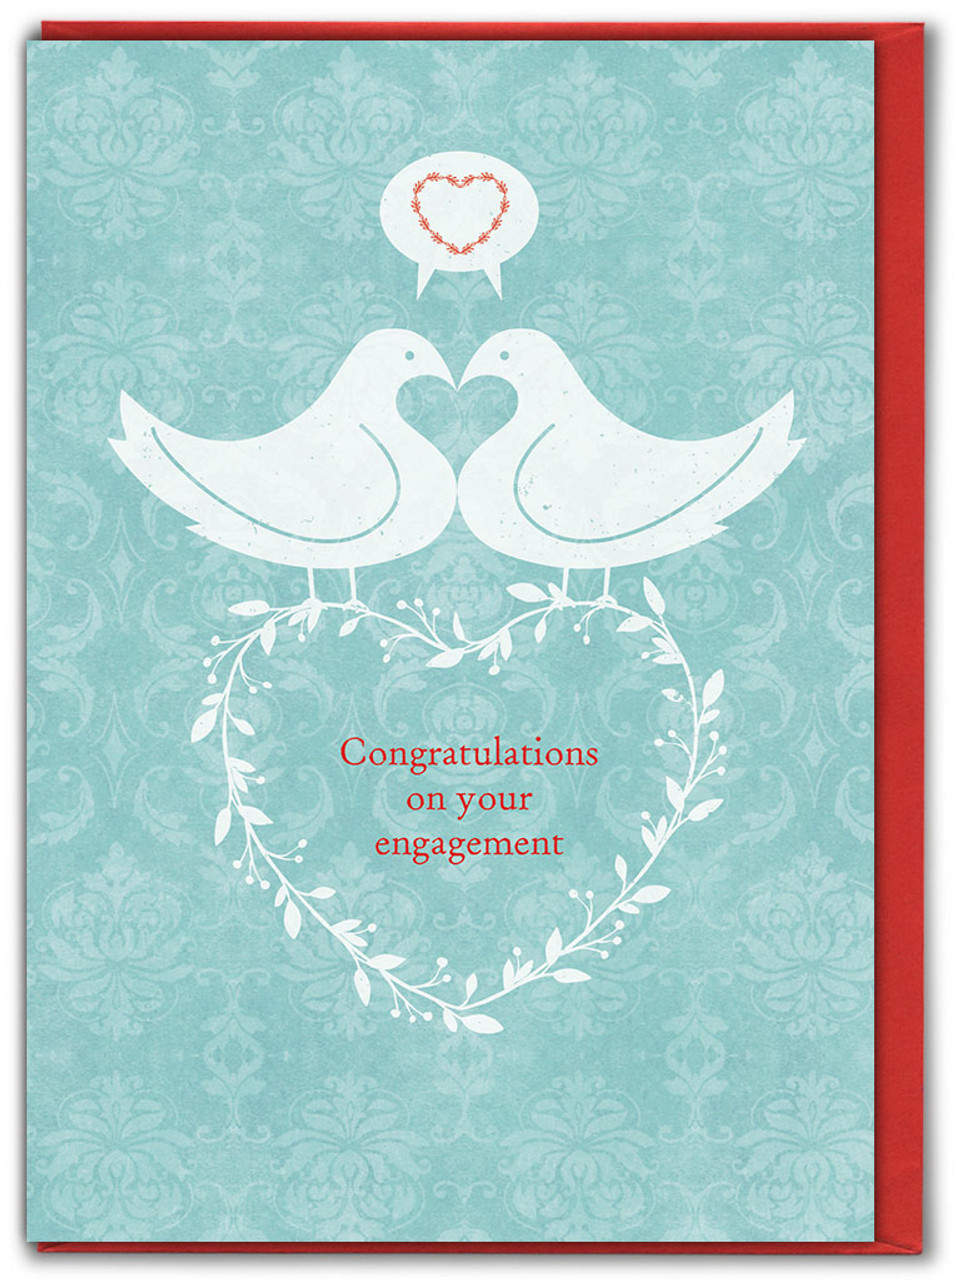 Funny Engagement Card - Love Birds By Brainbox Candy 